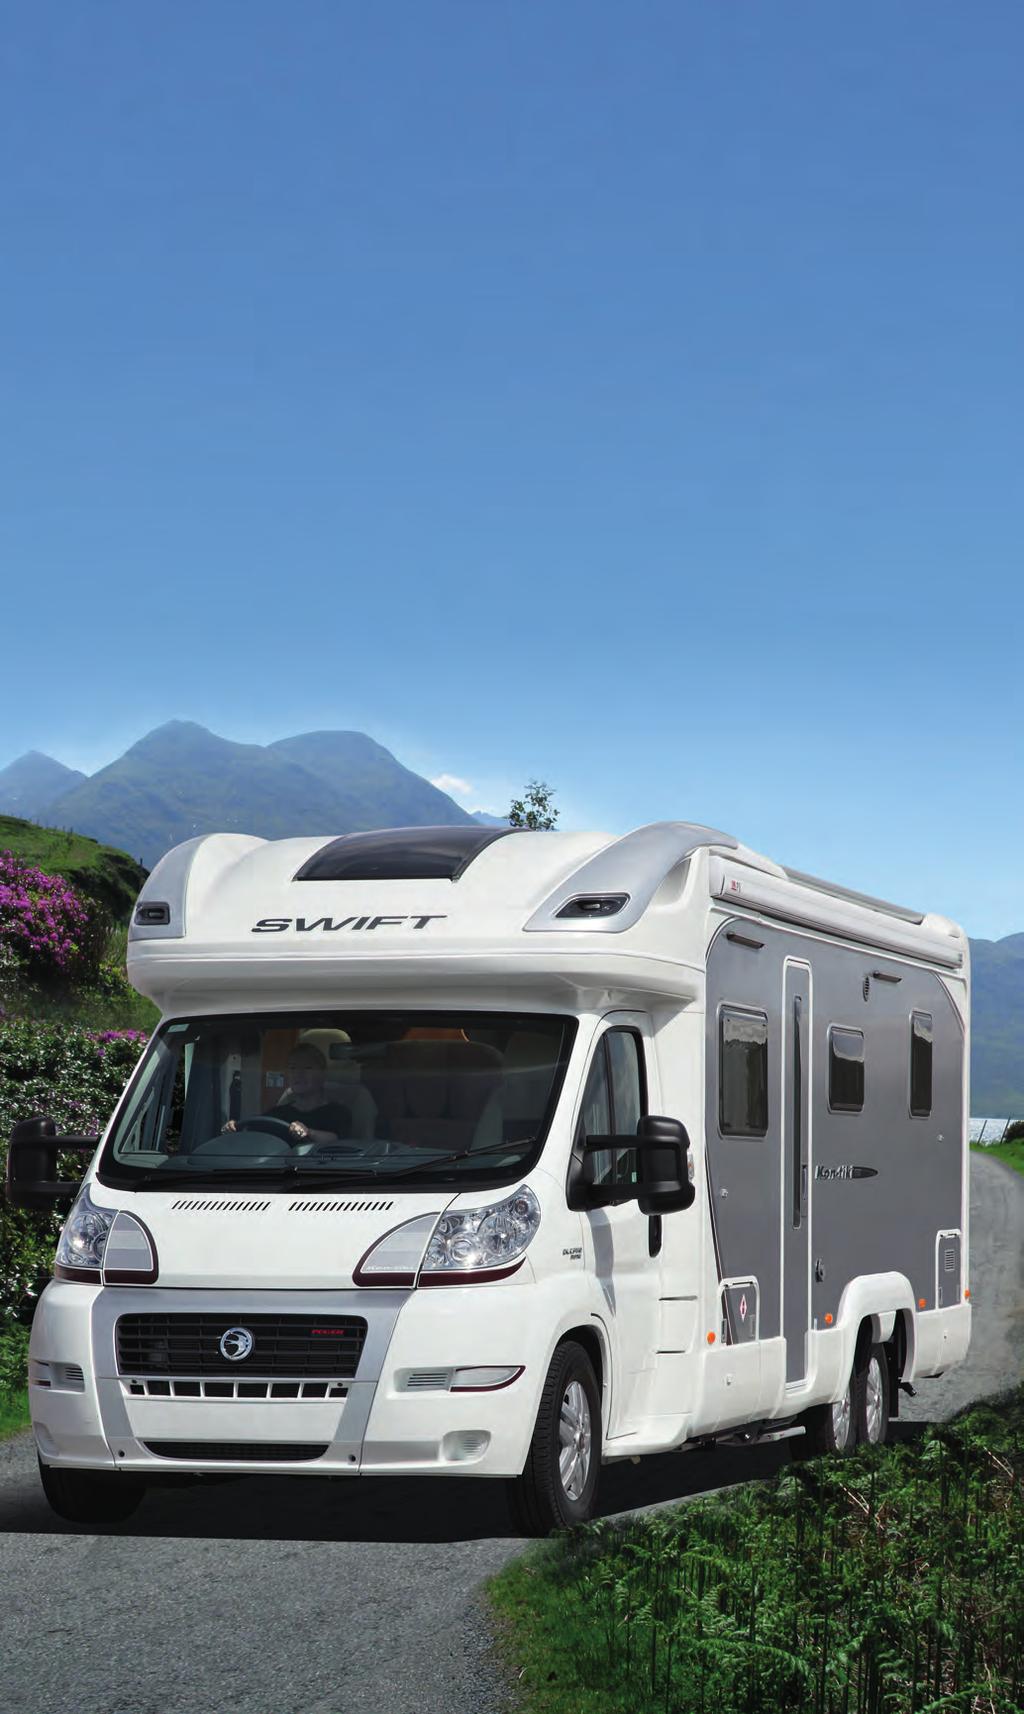 i i Motorhomes Swift Group Limited provides a three-year warranty on the coachbuilt element of the motorhome, see www.swiftmotorhomes.co.uk for more details.